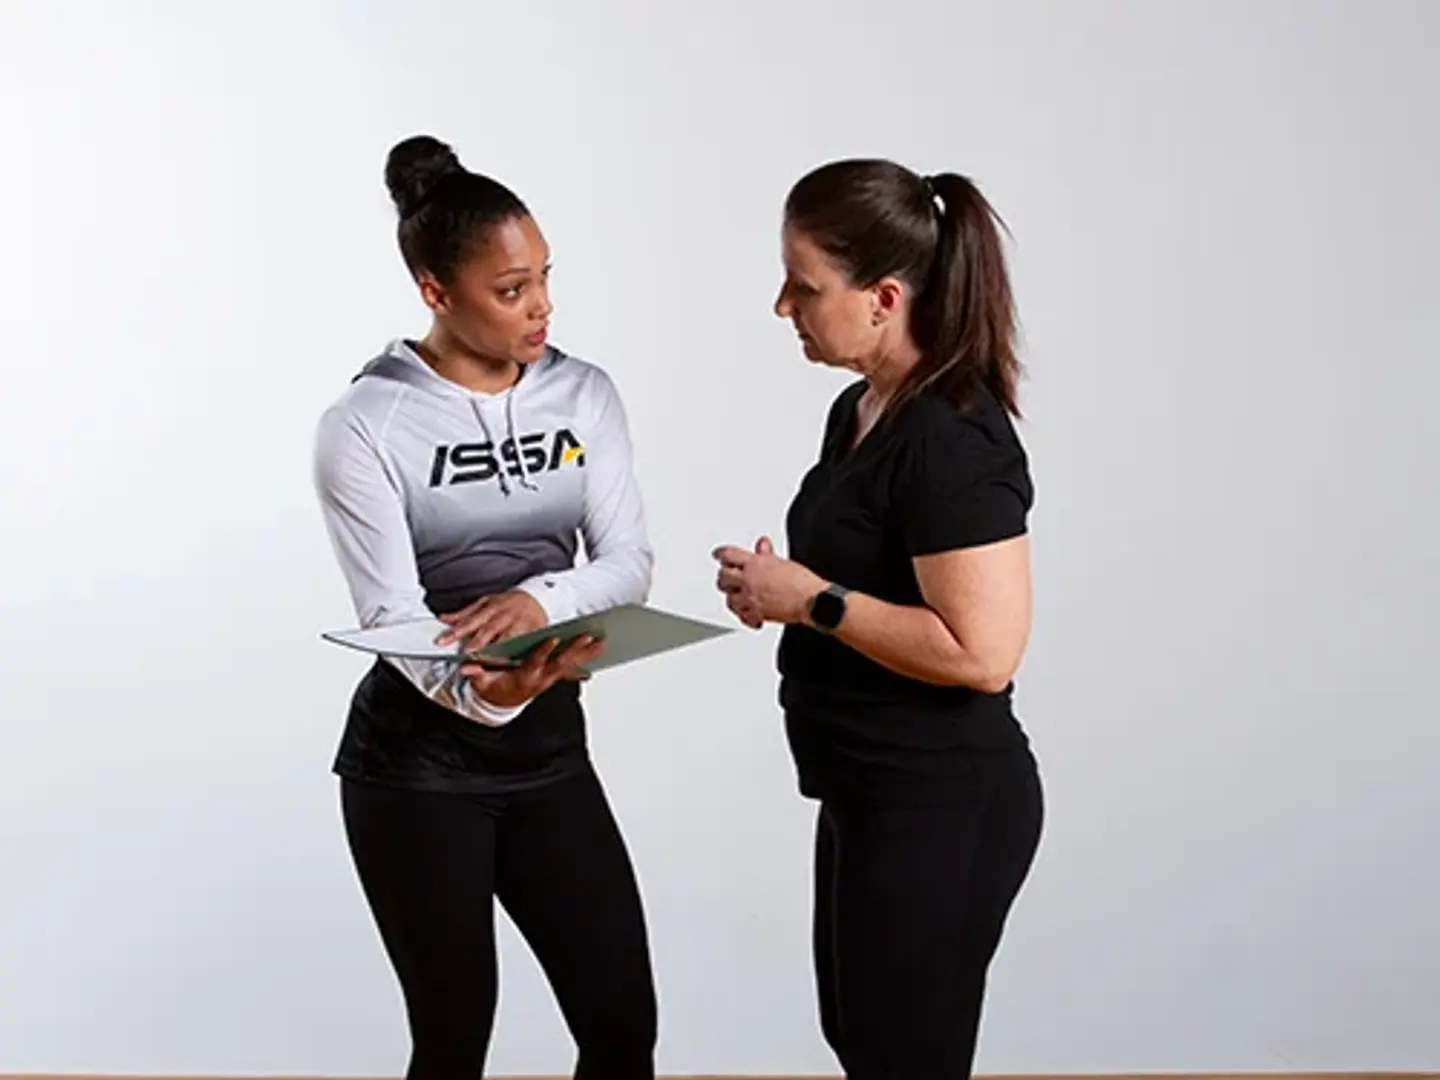 ISSA Certified Personal Trainer speaking with a client